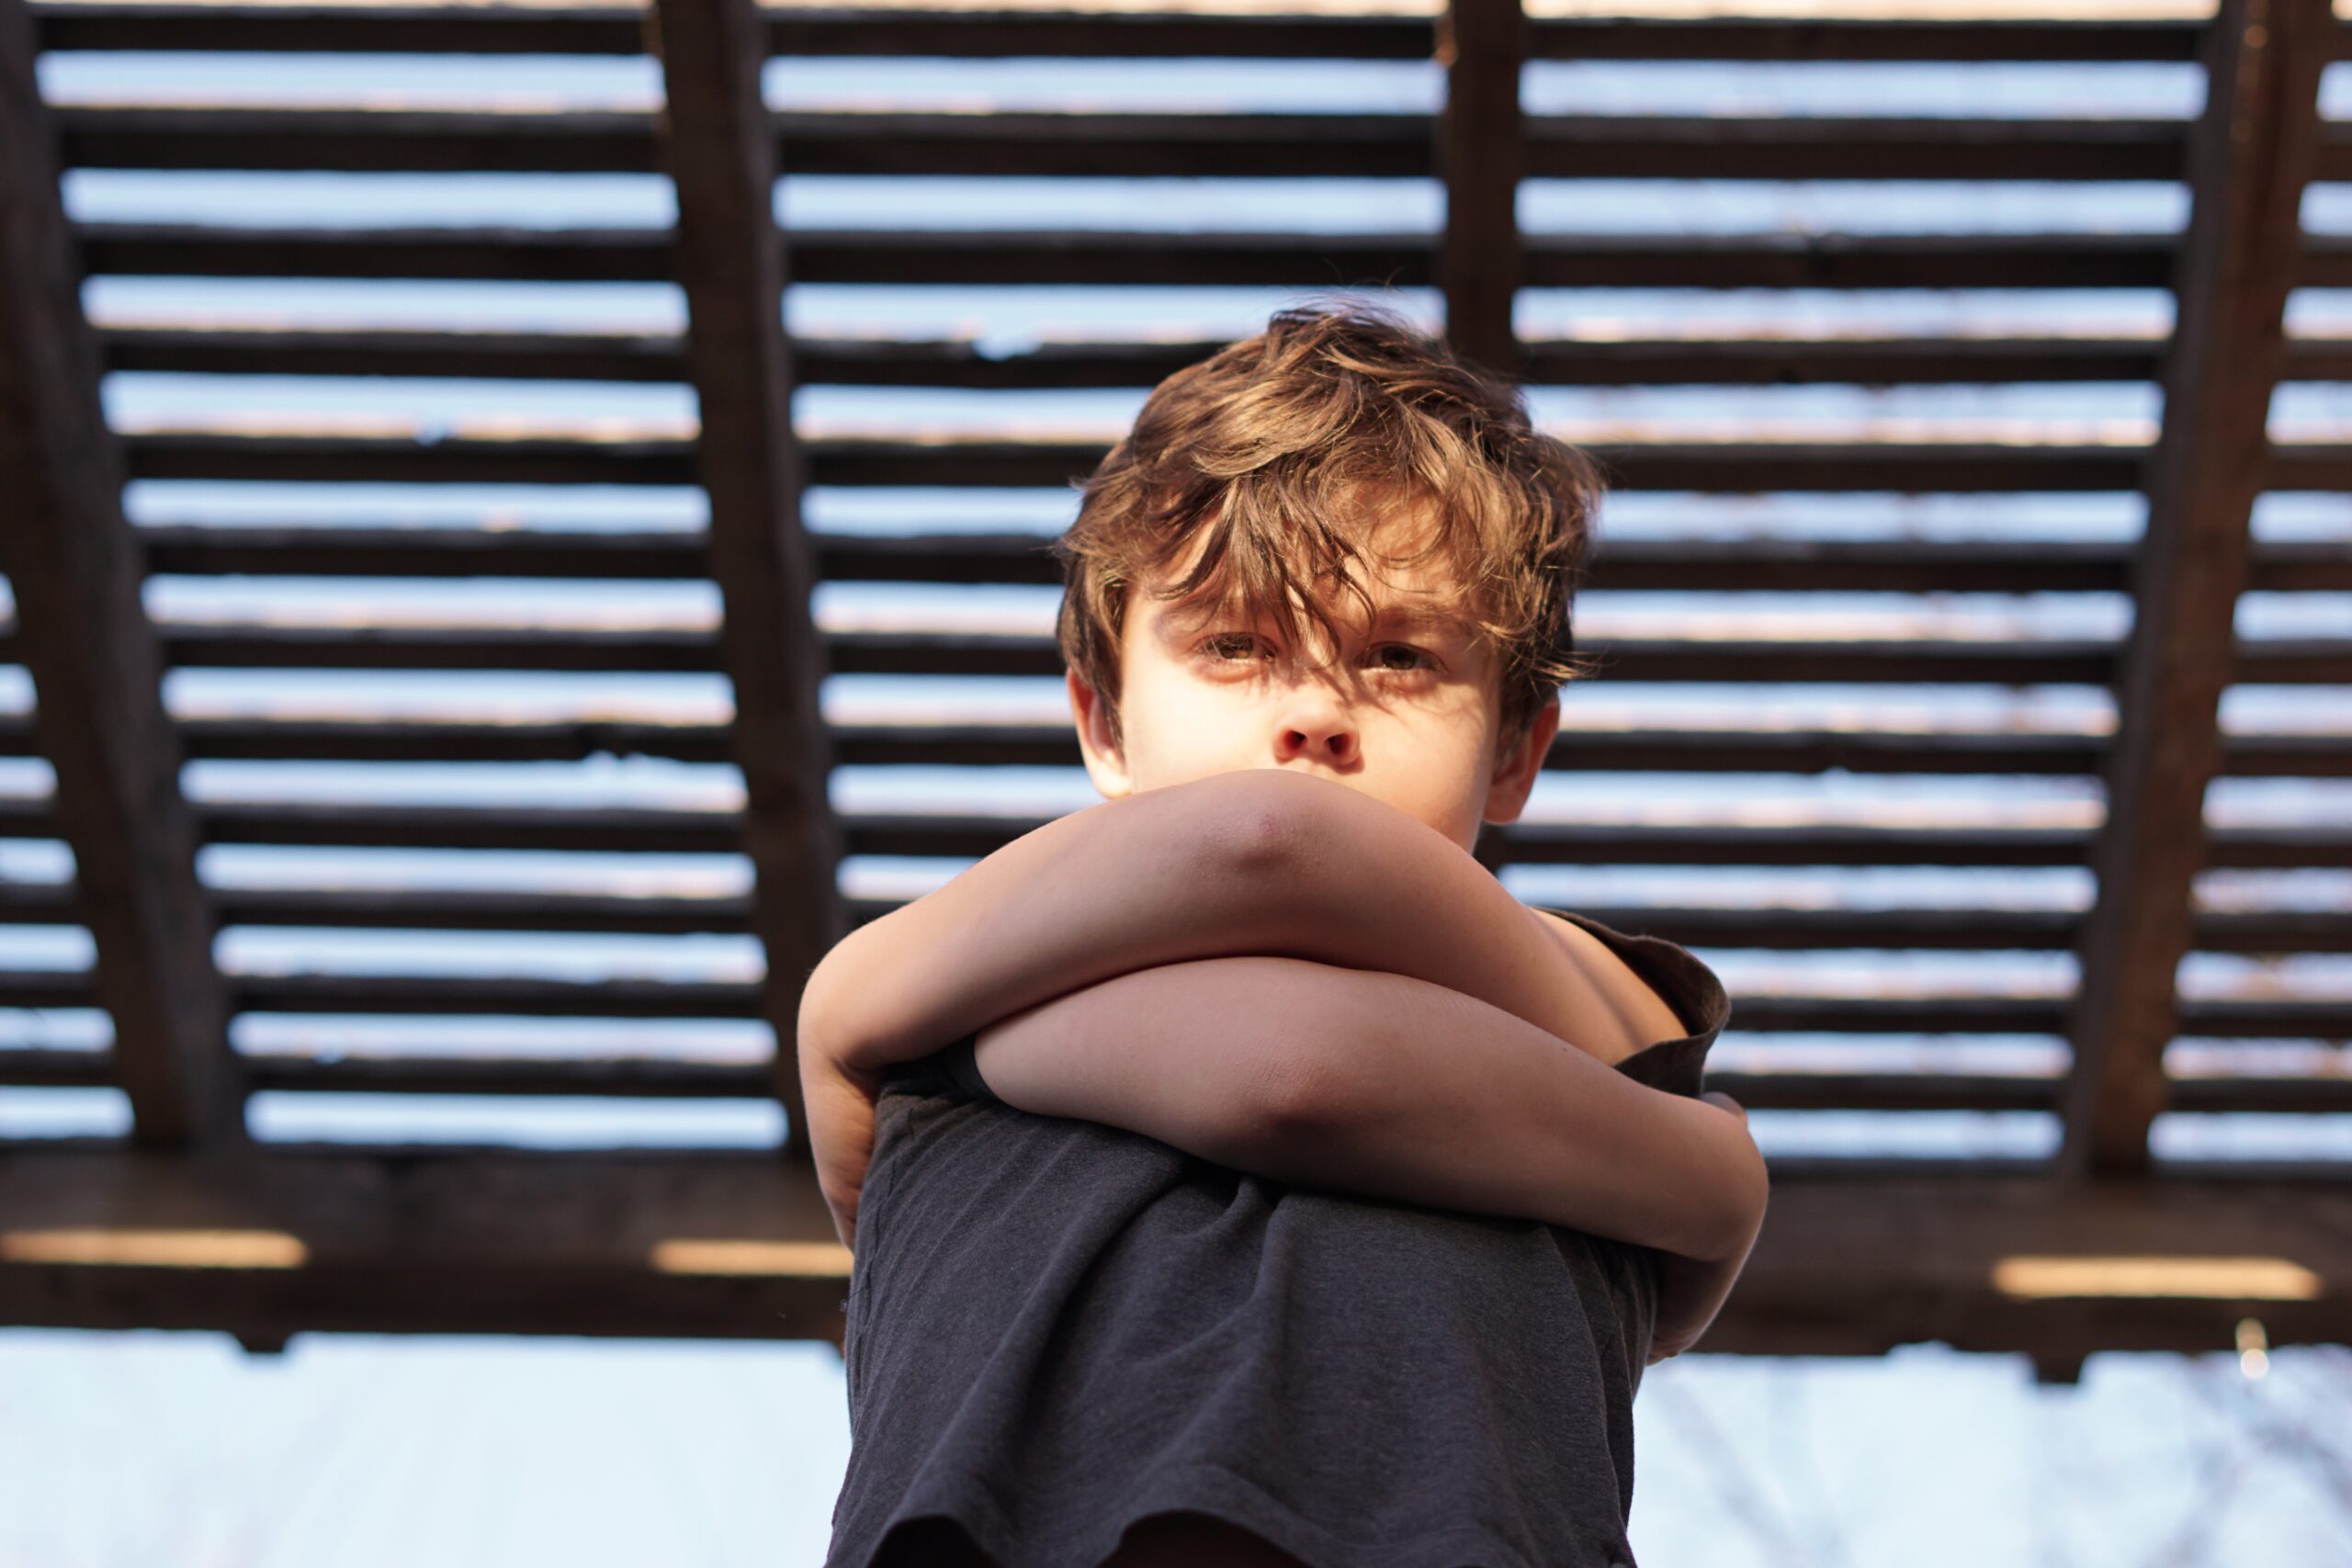 #JamesDonaldson On #MentalHealth – Young #Kids Are At Risk Of #SuicidalIdeation Too. Here’s What #MentalHealthProfessionals Recommend #Parents Do If Their #Child Is Struggling